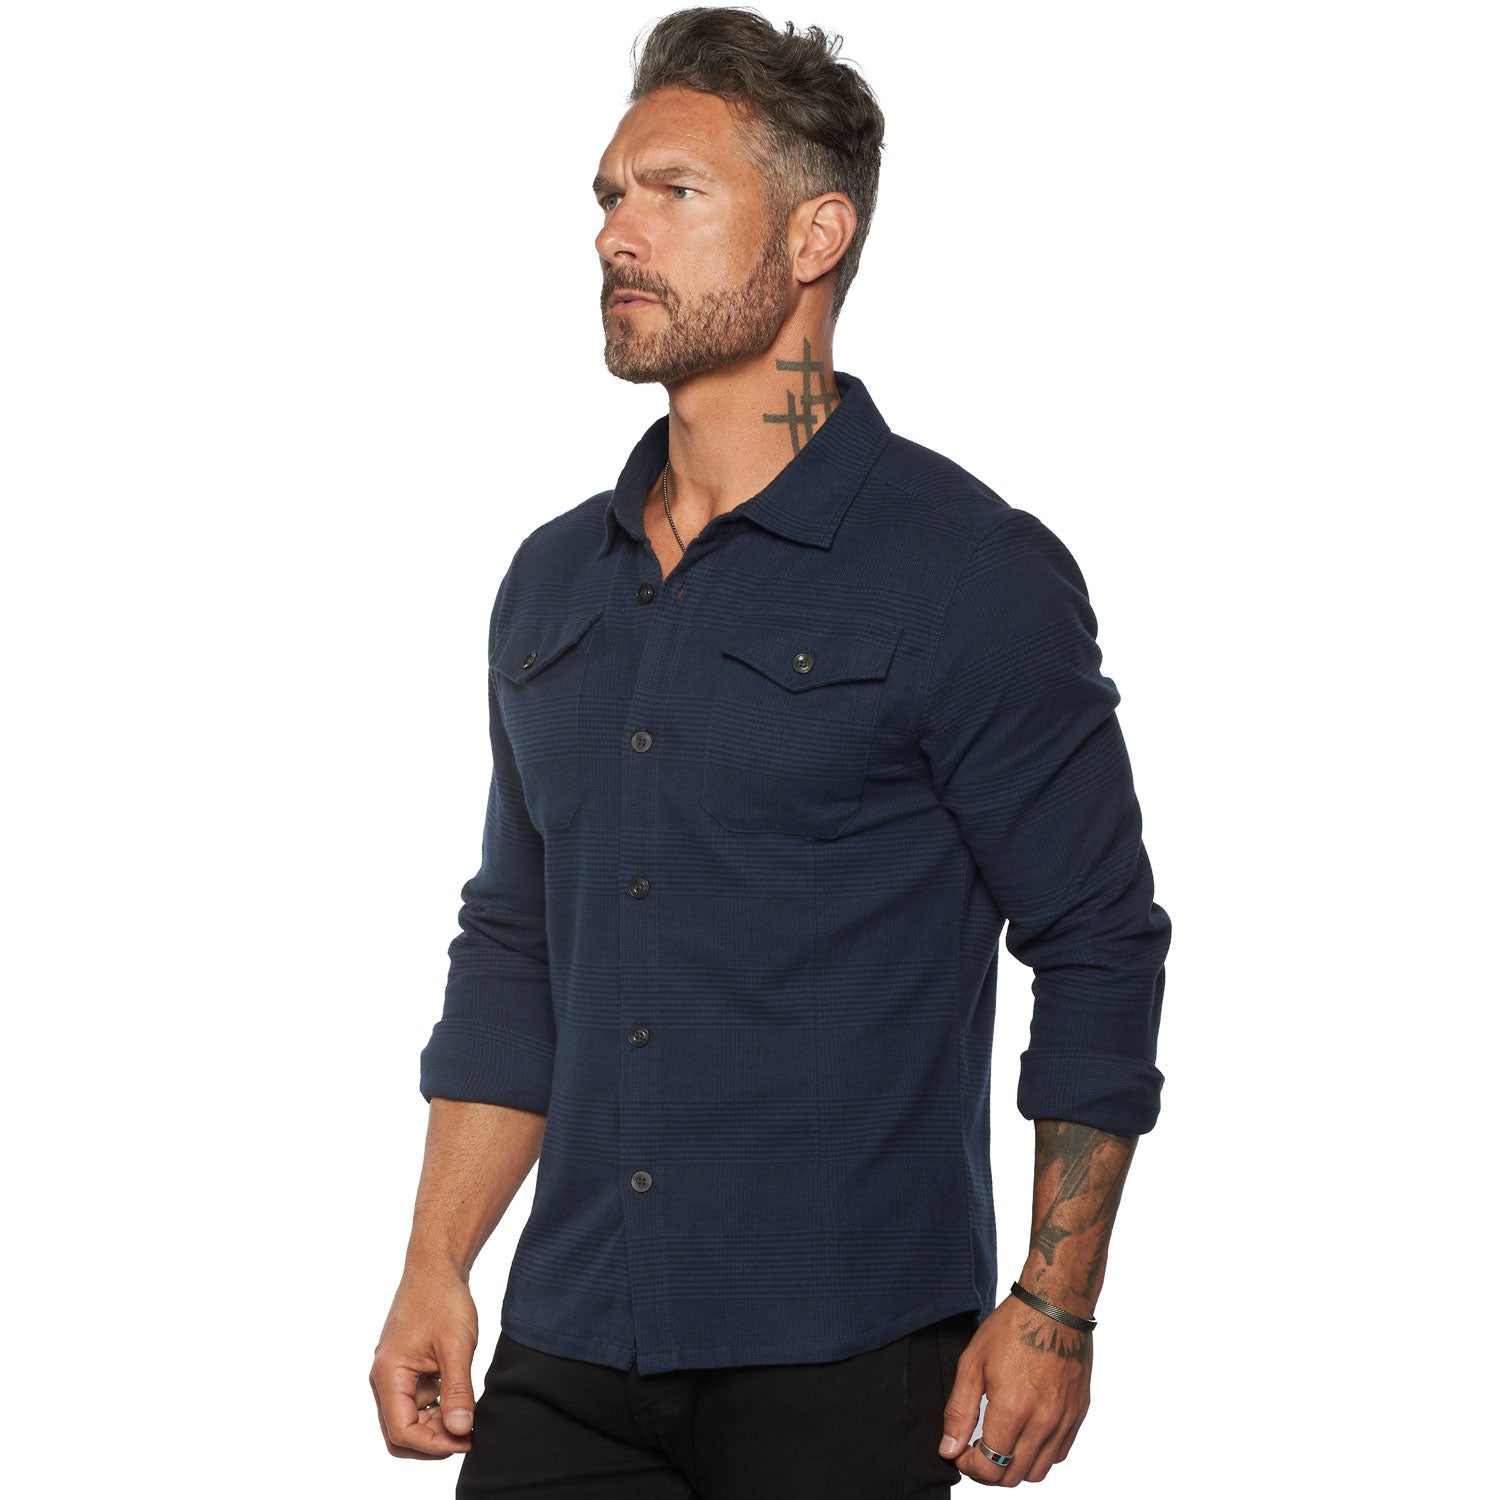 Designer Shirt Buttons - Rounded Edge Collar/Sleeve/Front Shirt